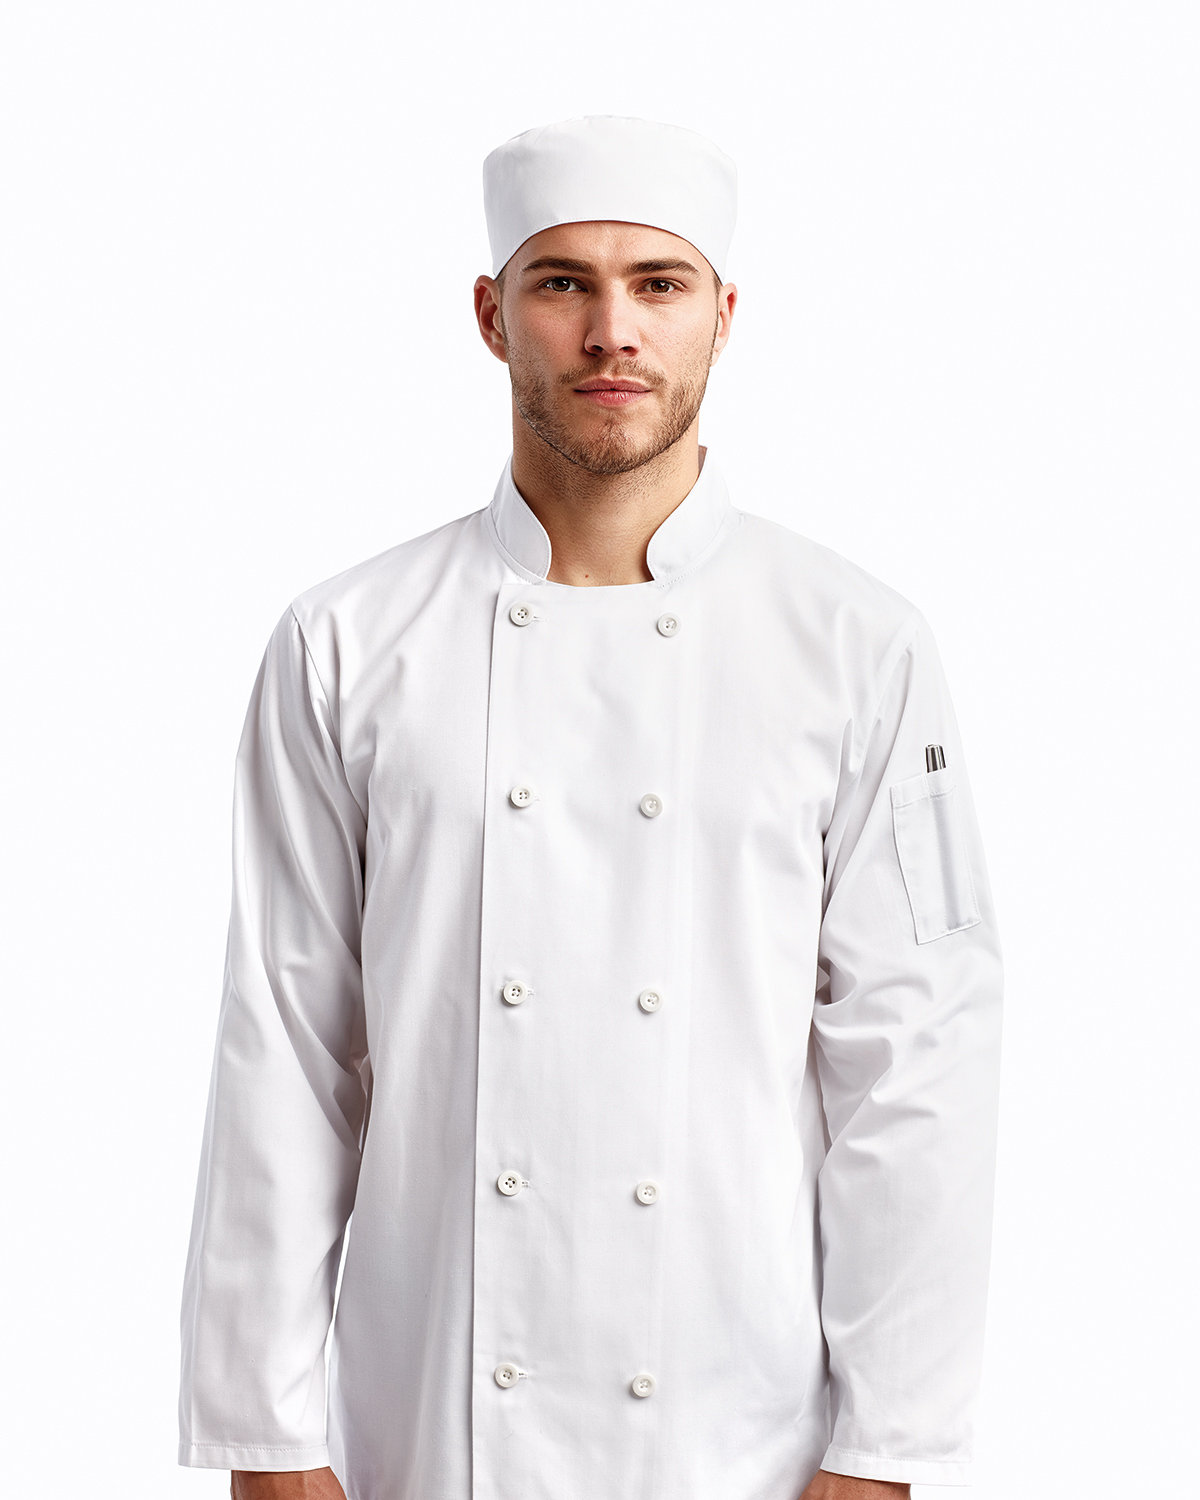 Artisan Collection by Reprime Unisex Chef's Beanie WHITE 